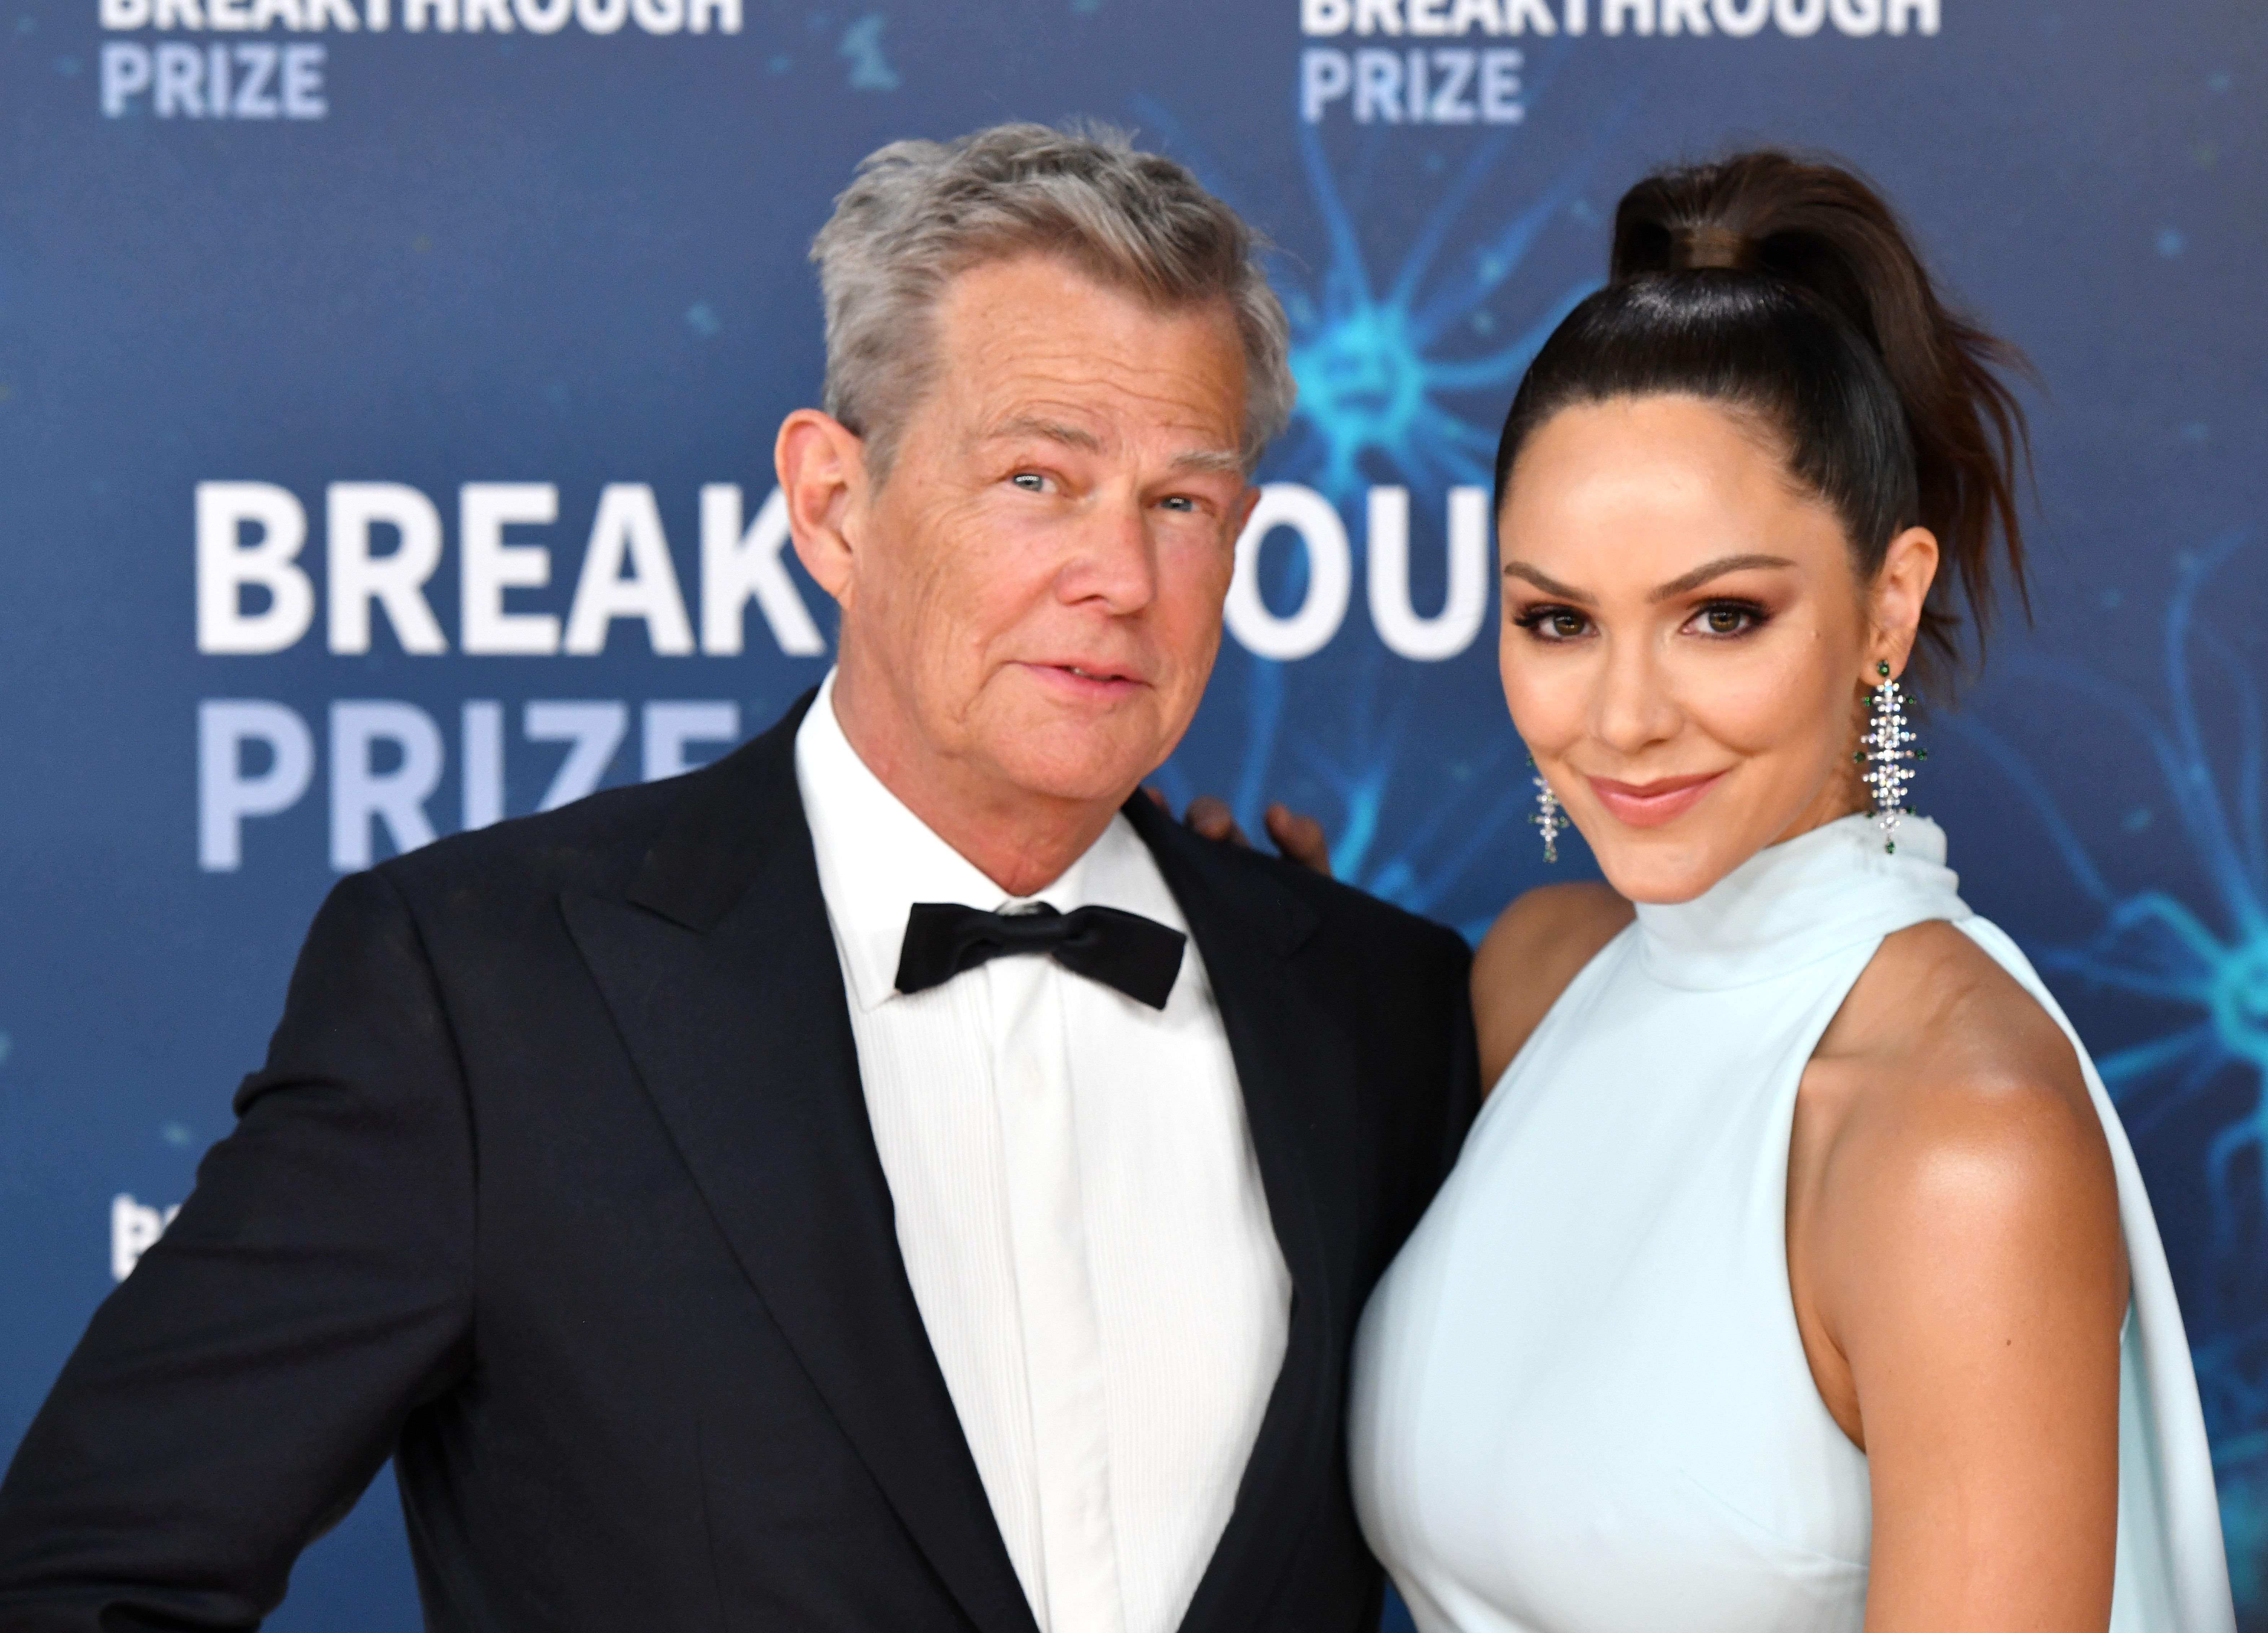 David Foster and Katharine McPhee at the 2020 Breakthrough Prize Red Carpet on November 03, 2019 | Photo: Getty Images